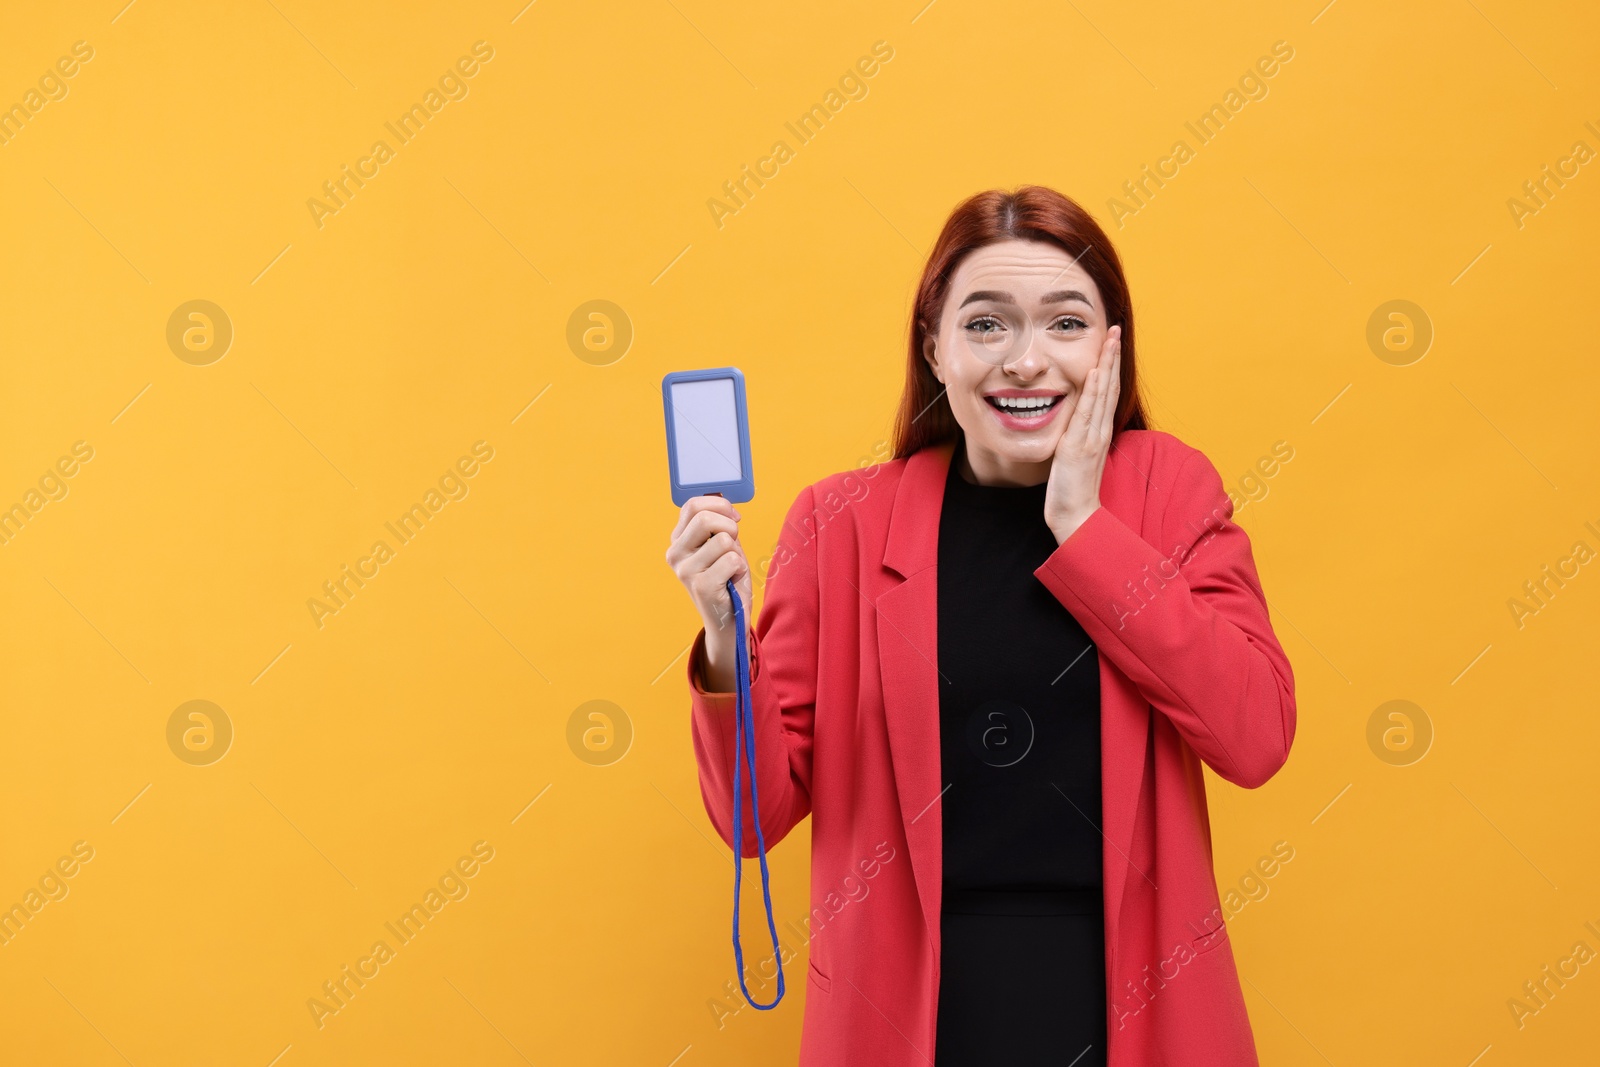 Photo of Emotional woman with vip pass badge on orange background. Space for text